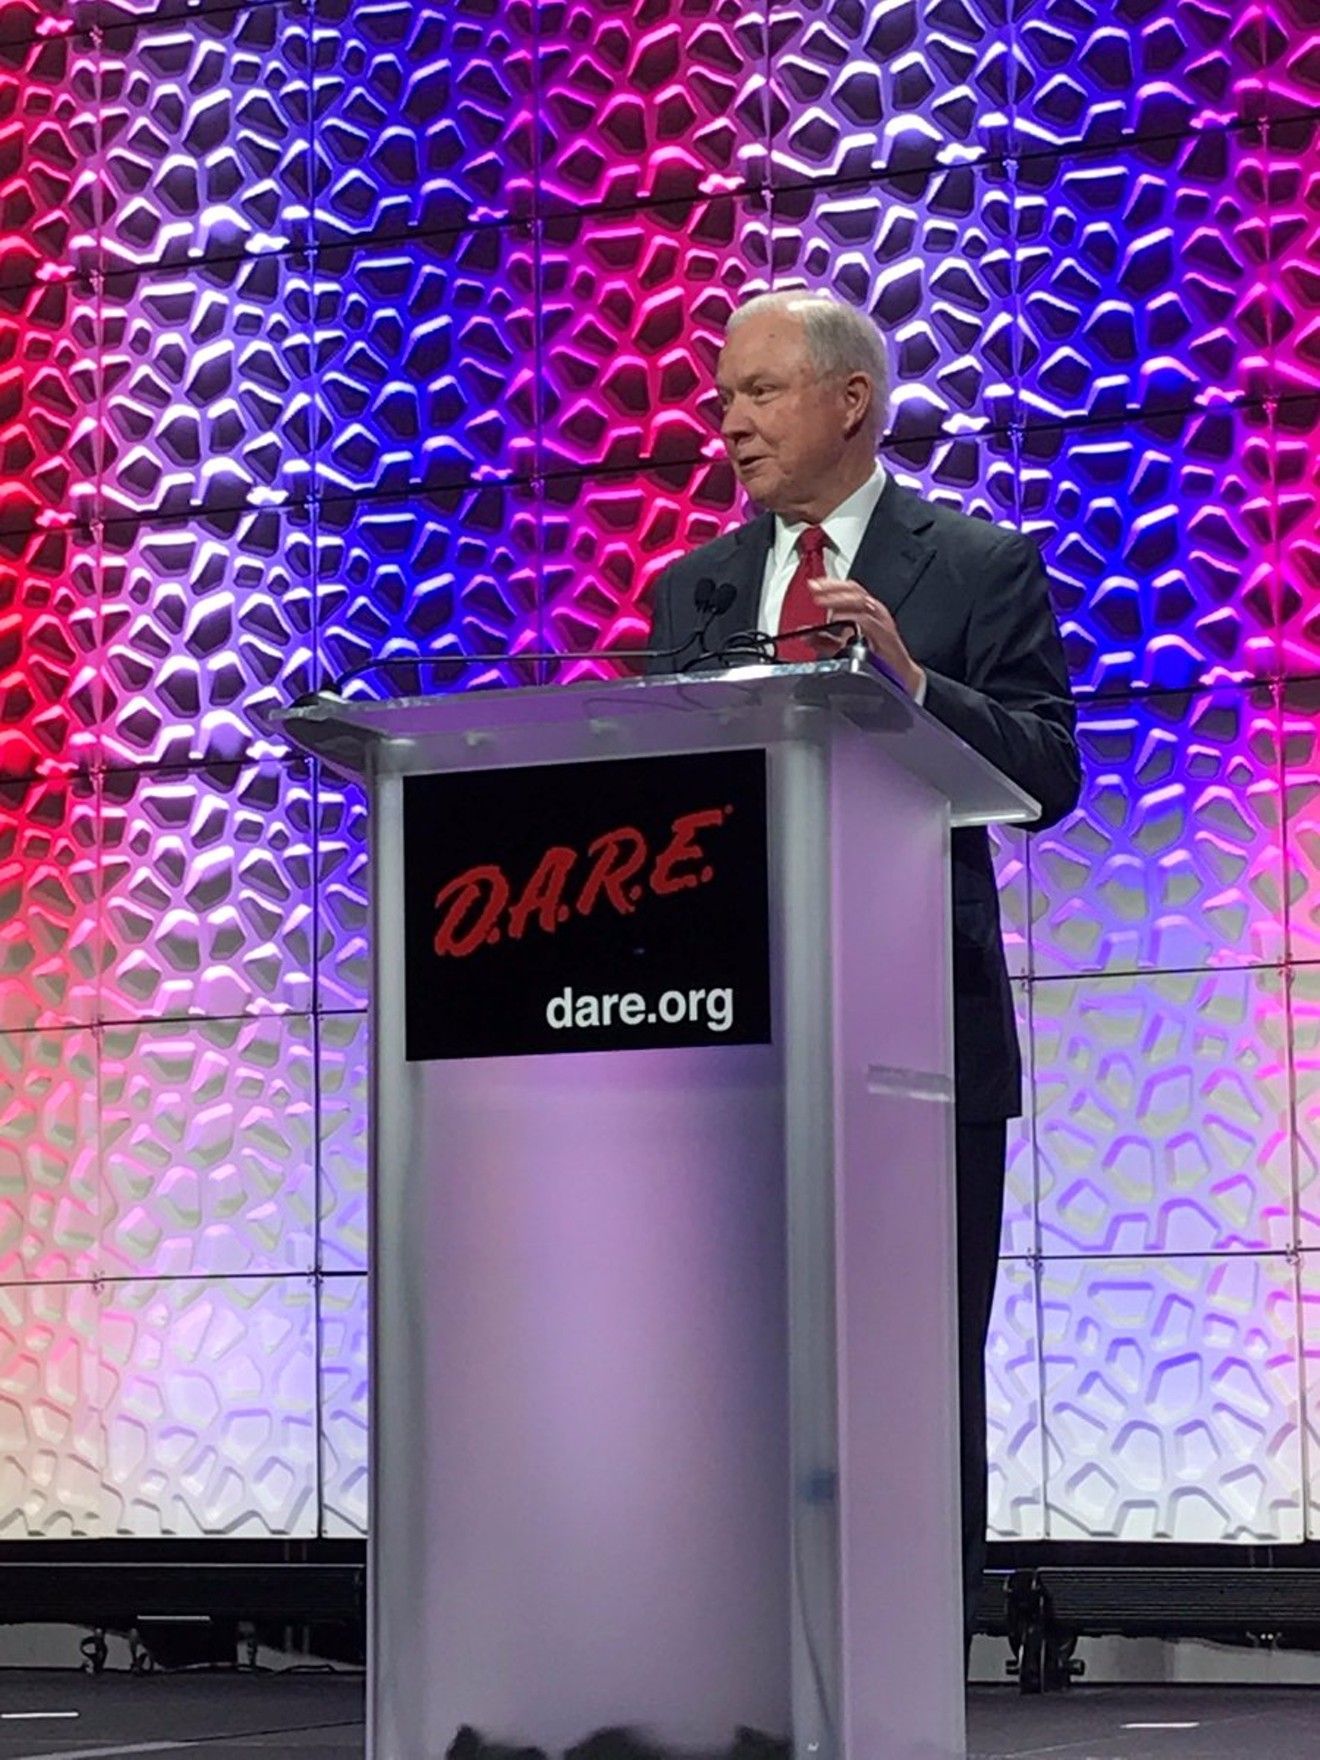 U.S. Attorney General Jeff Sessions gave the keynote speech at the DARE International Training Conference in Grapevine on Tuesday.